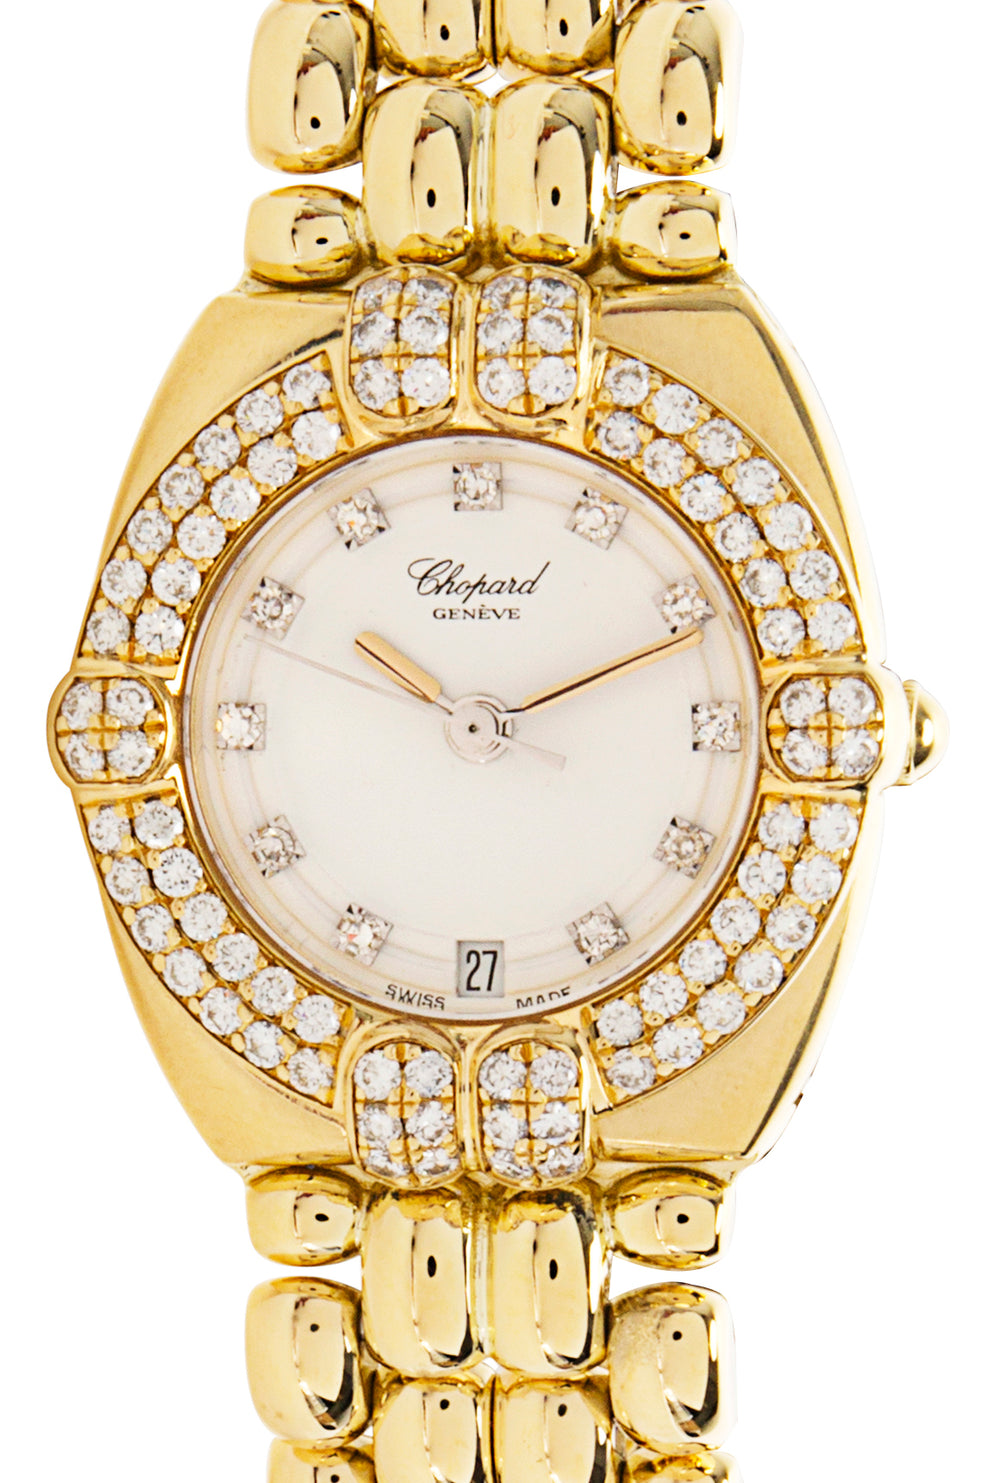 Chopard Gstaad 5229 1